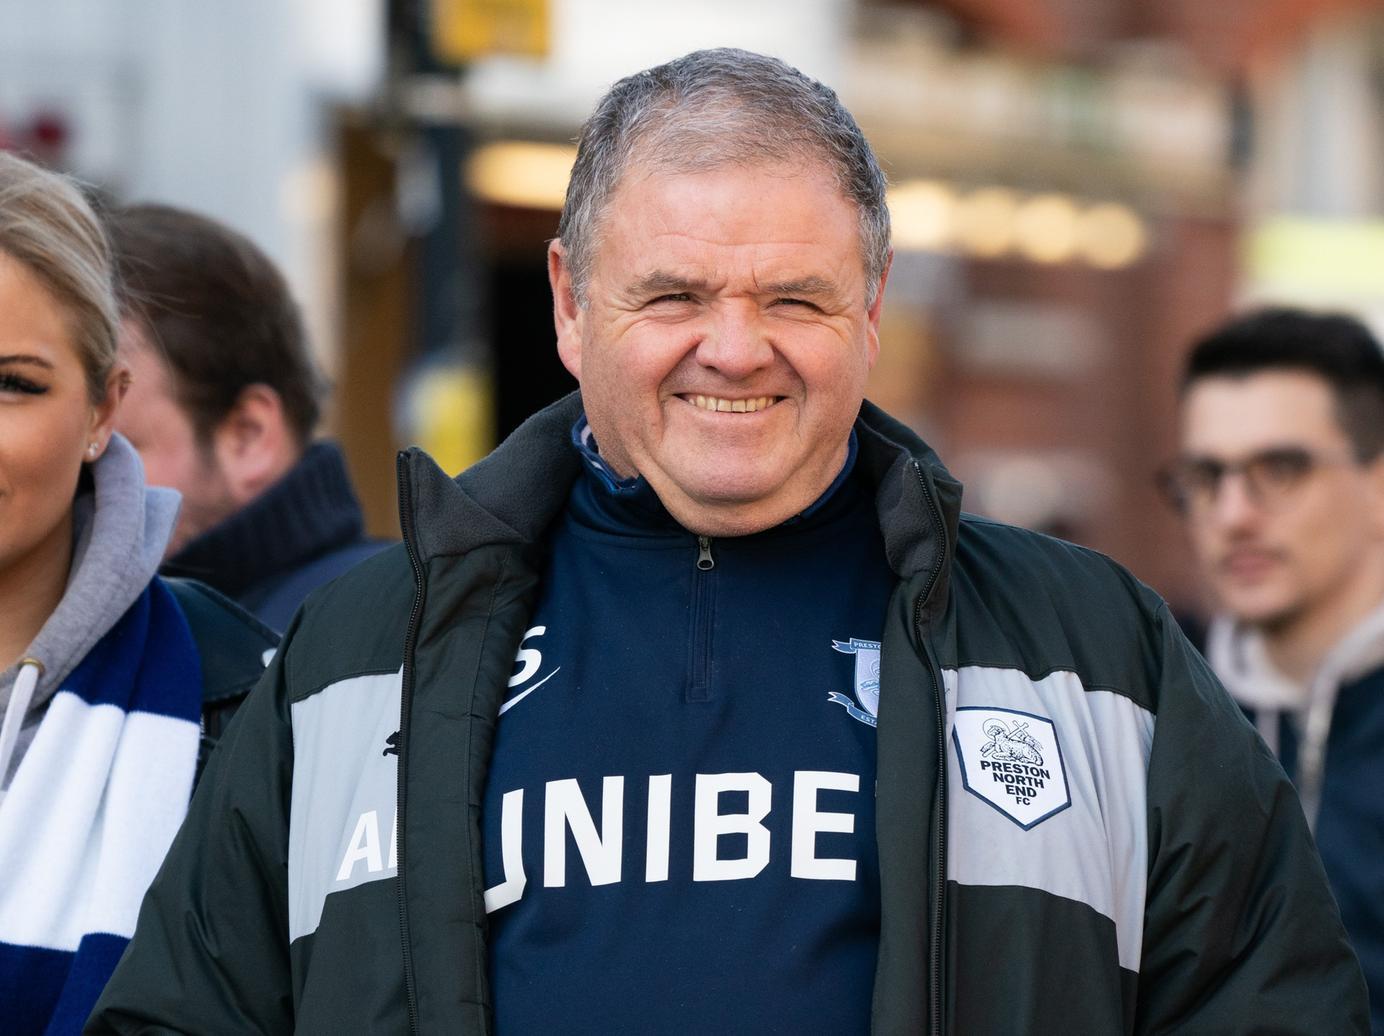 One fan is kitted out on his PNE clothing ahead of the clash at the top of the table.